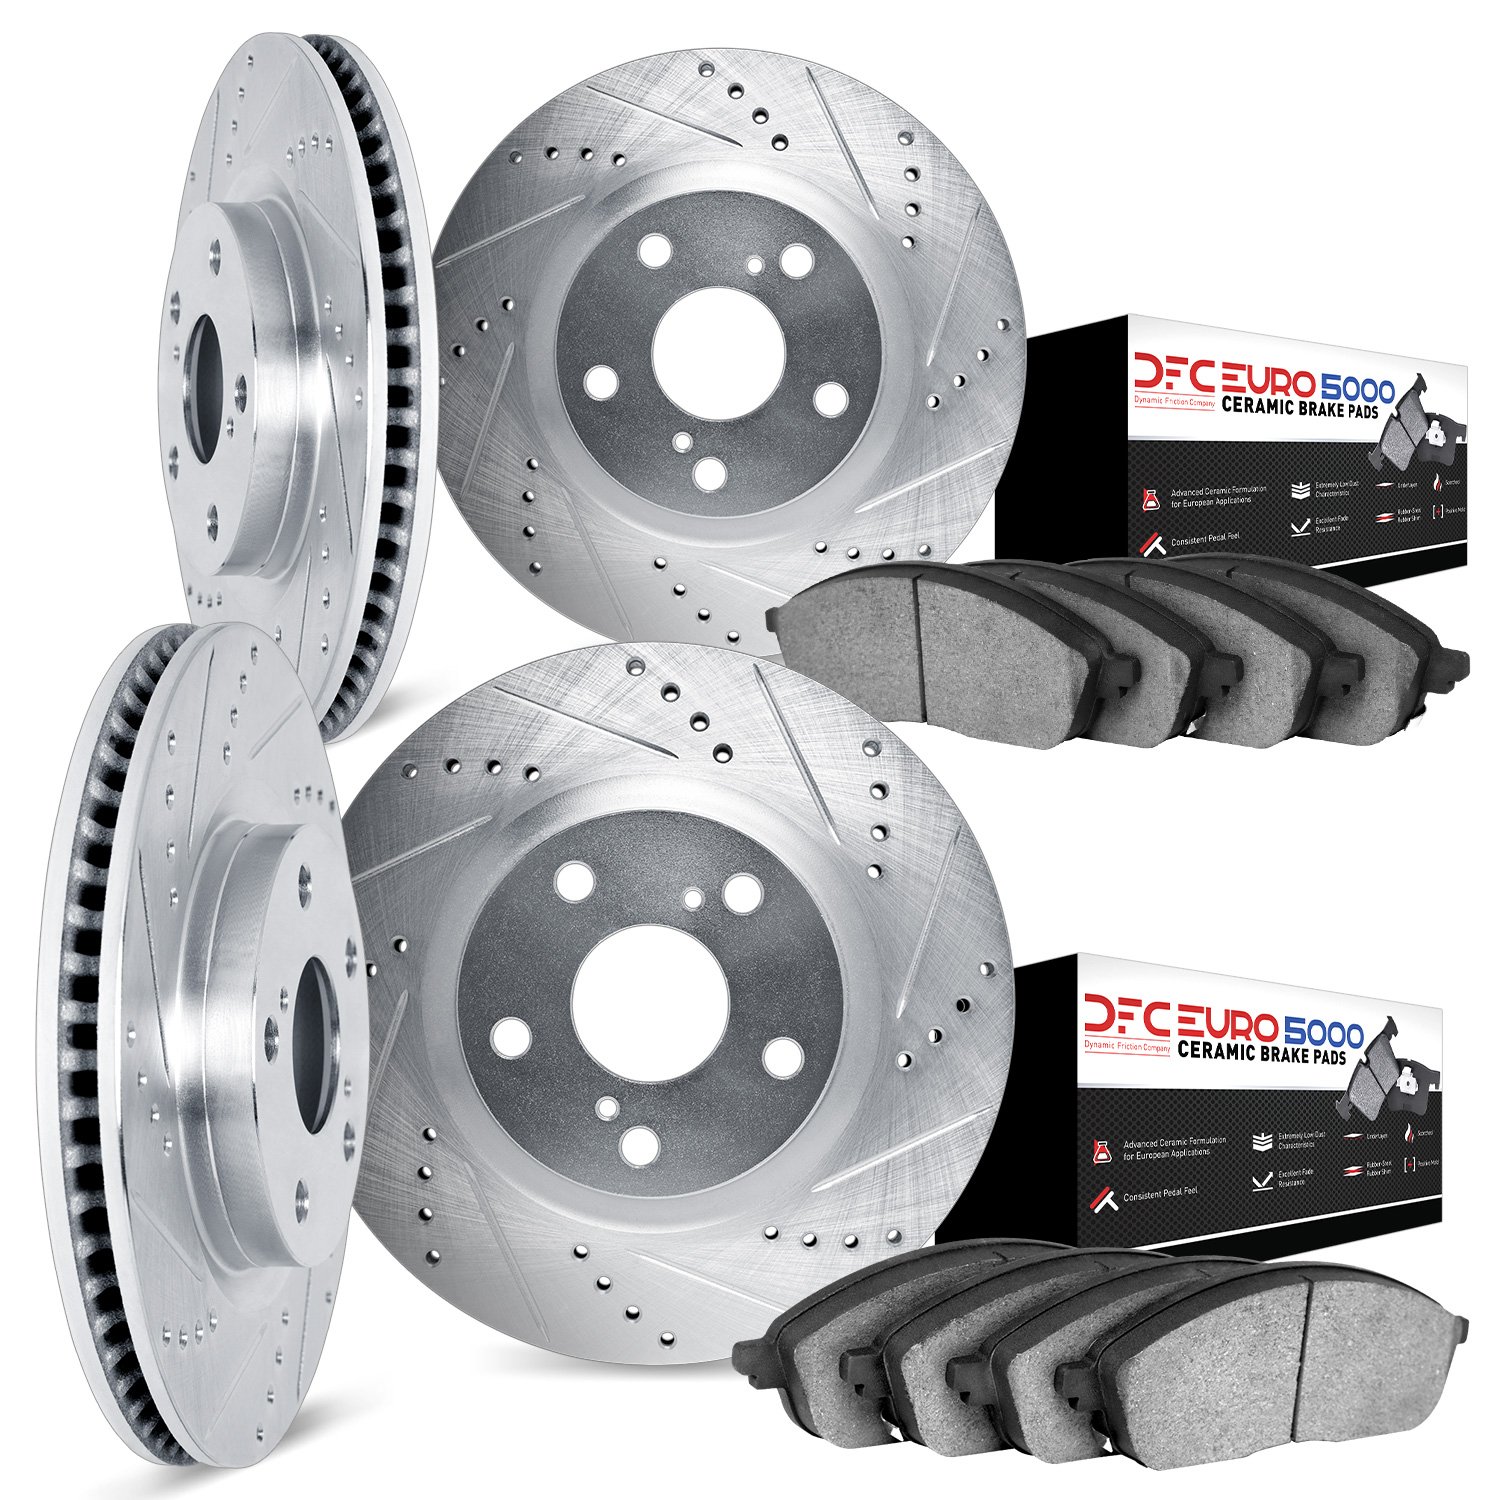 7604-20008 Drilled/Slotted Brake Rotors w/5000 Euro Ceramic Brake Pads Kit [Silver], 2017-2020 Jaguar, Position: Front and Rear